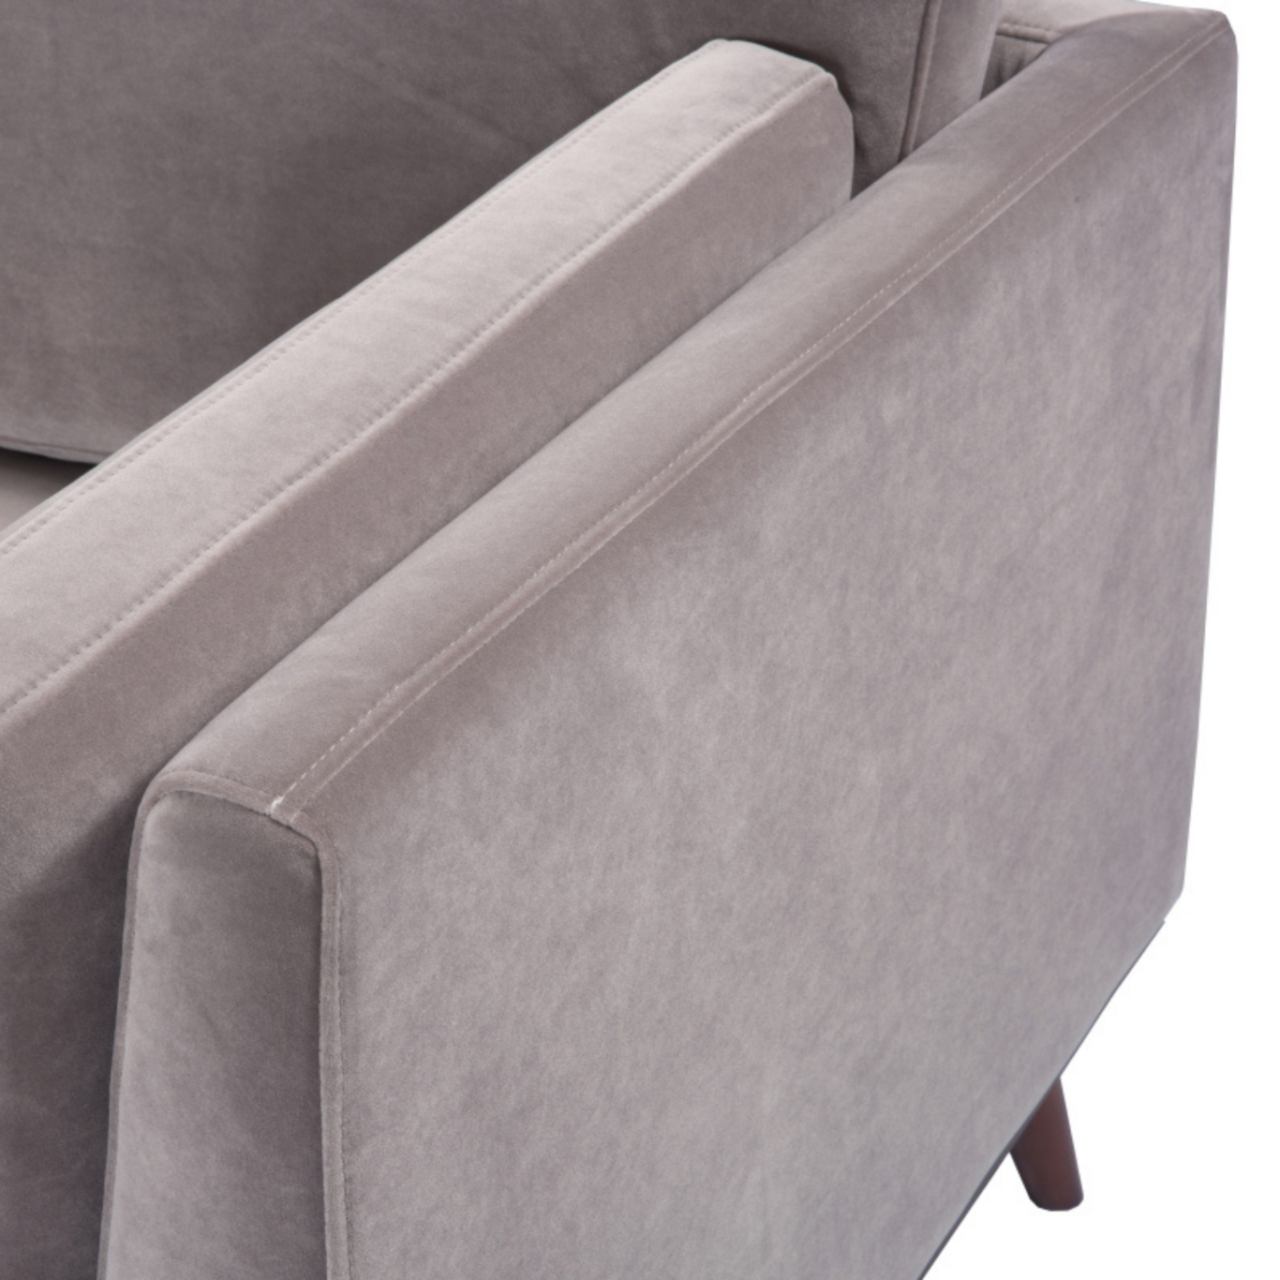 detail view of Simple, modern shaped 2 seater sofa in stone grey velvet upholstery